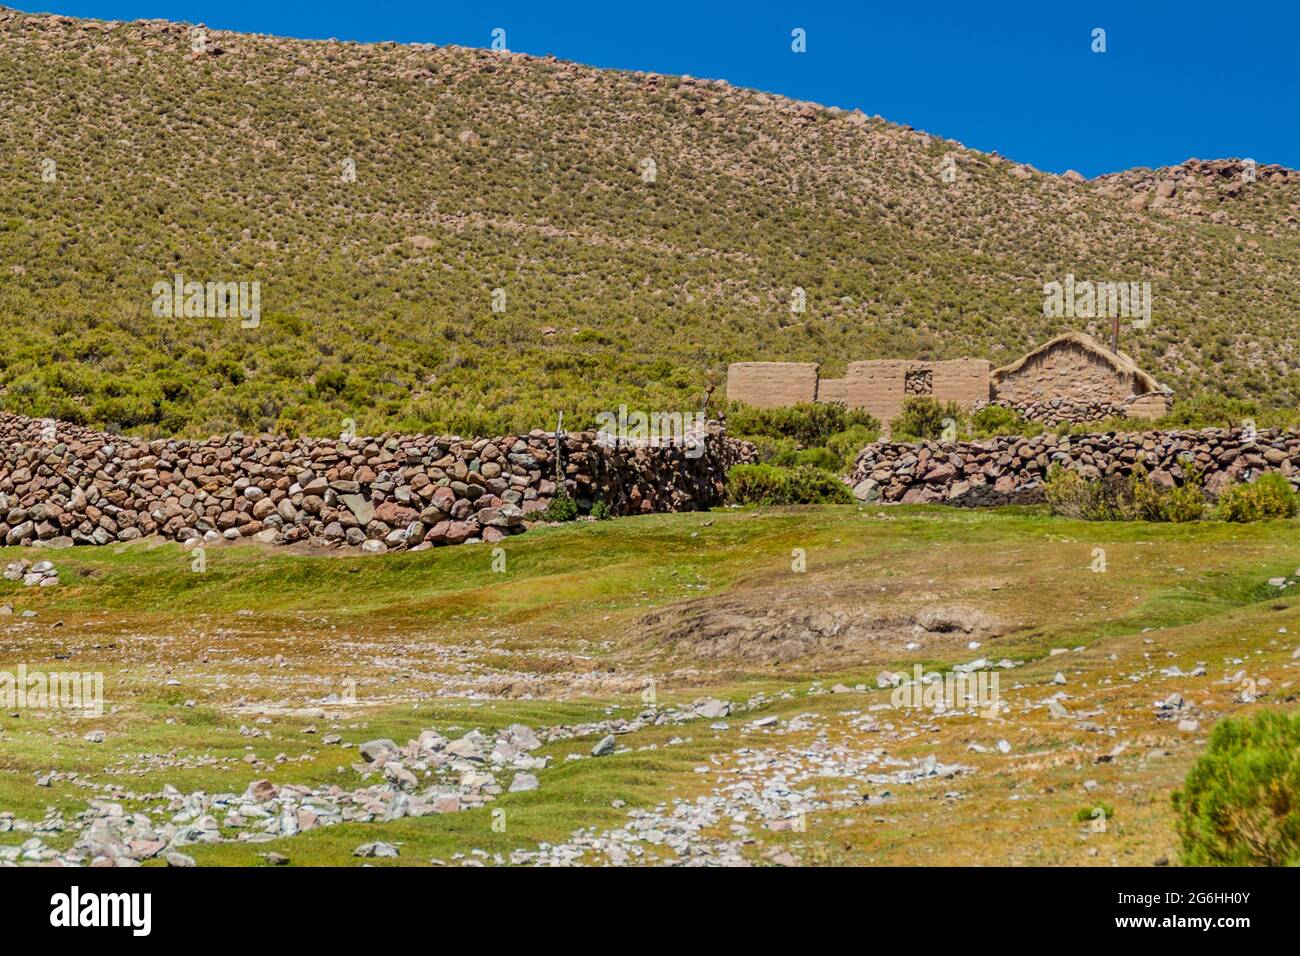 Adobe house in the wilderness of bolivian Altiplano Stock Photo